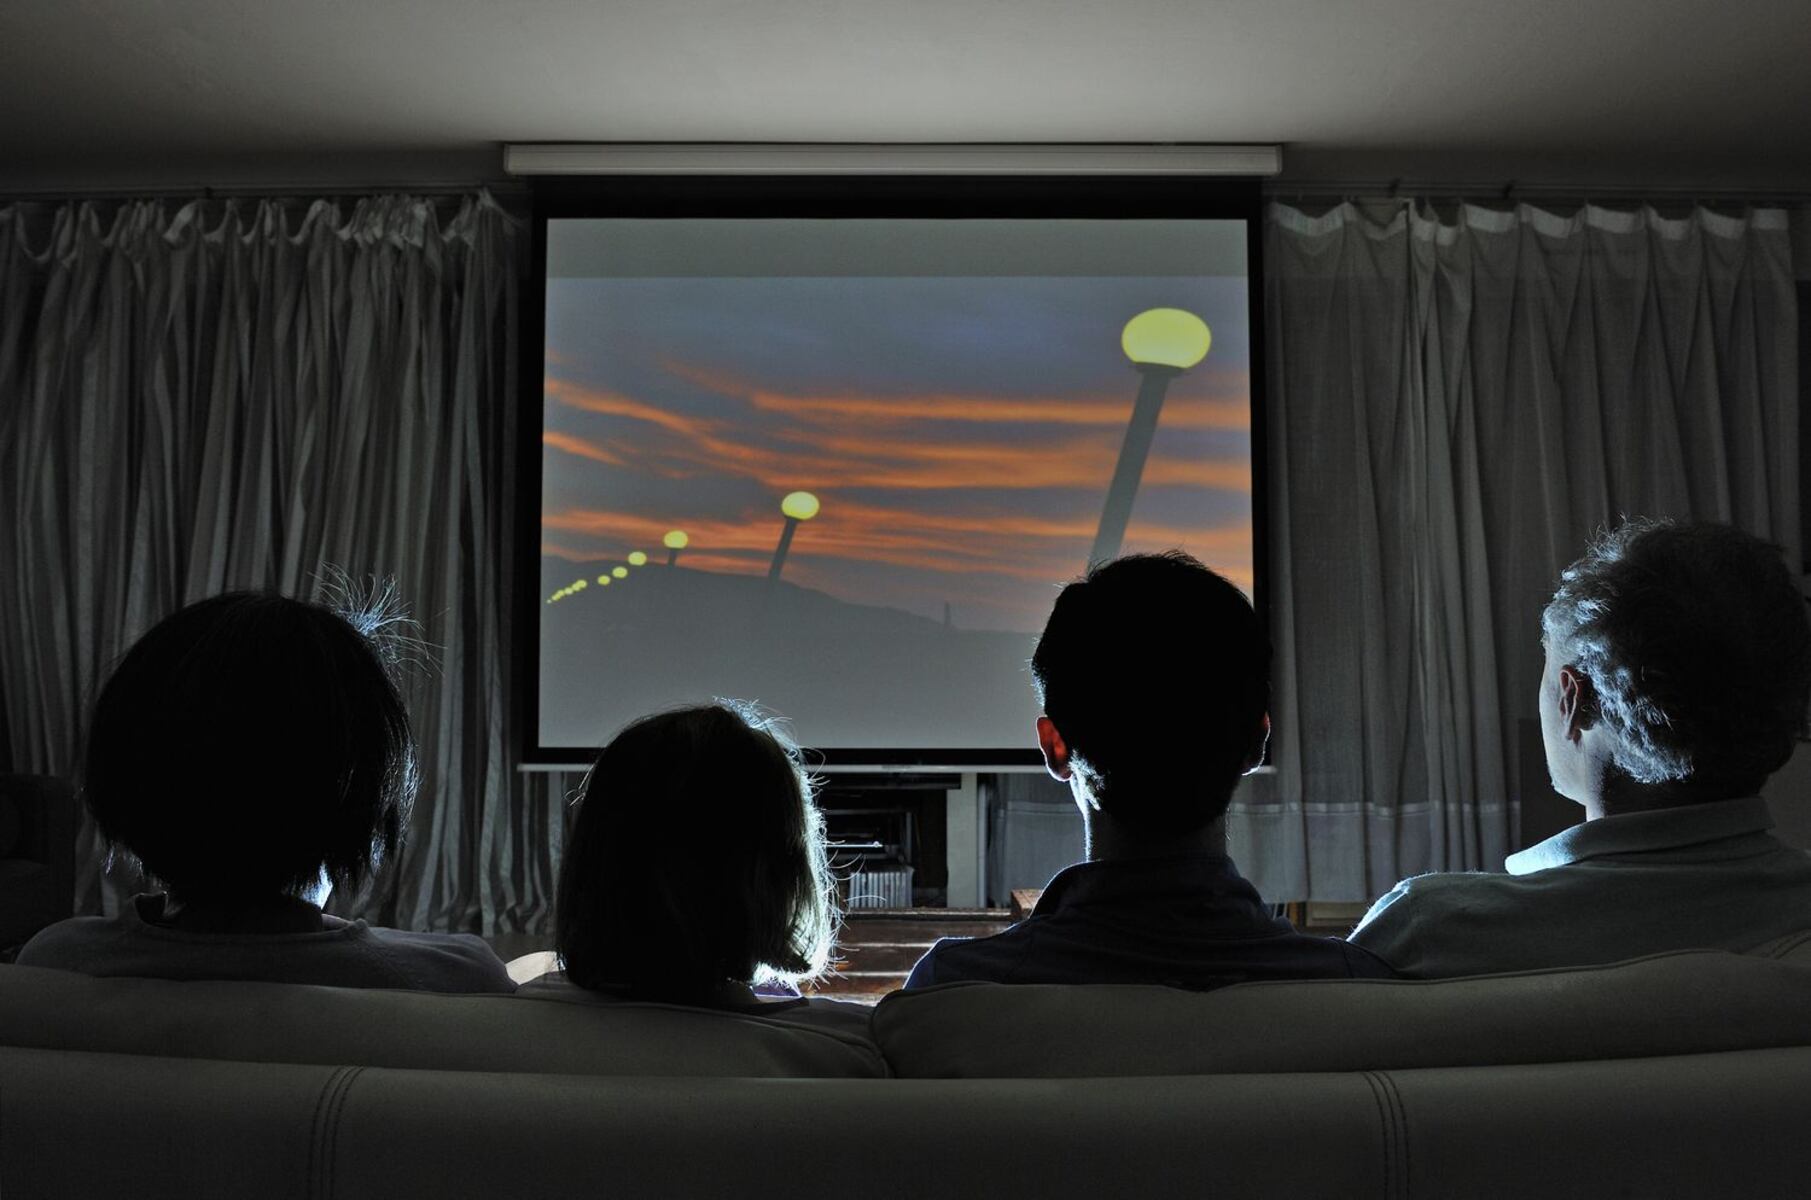 How To Watch TV With A Projector